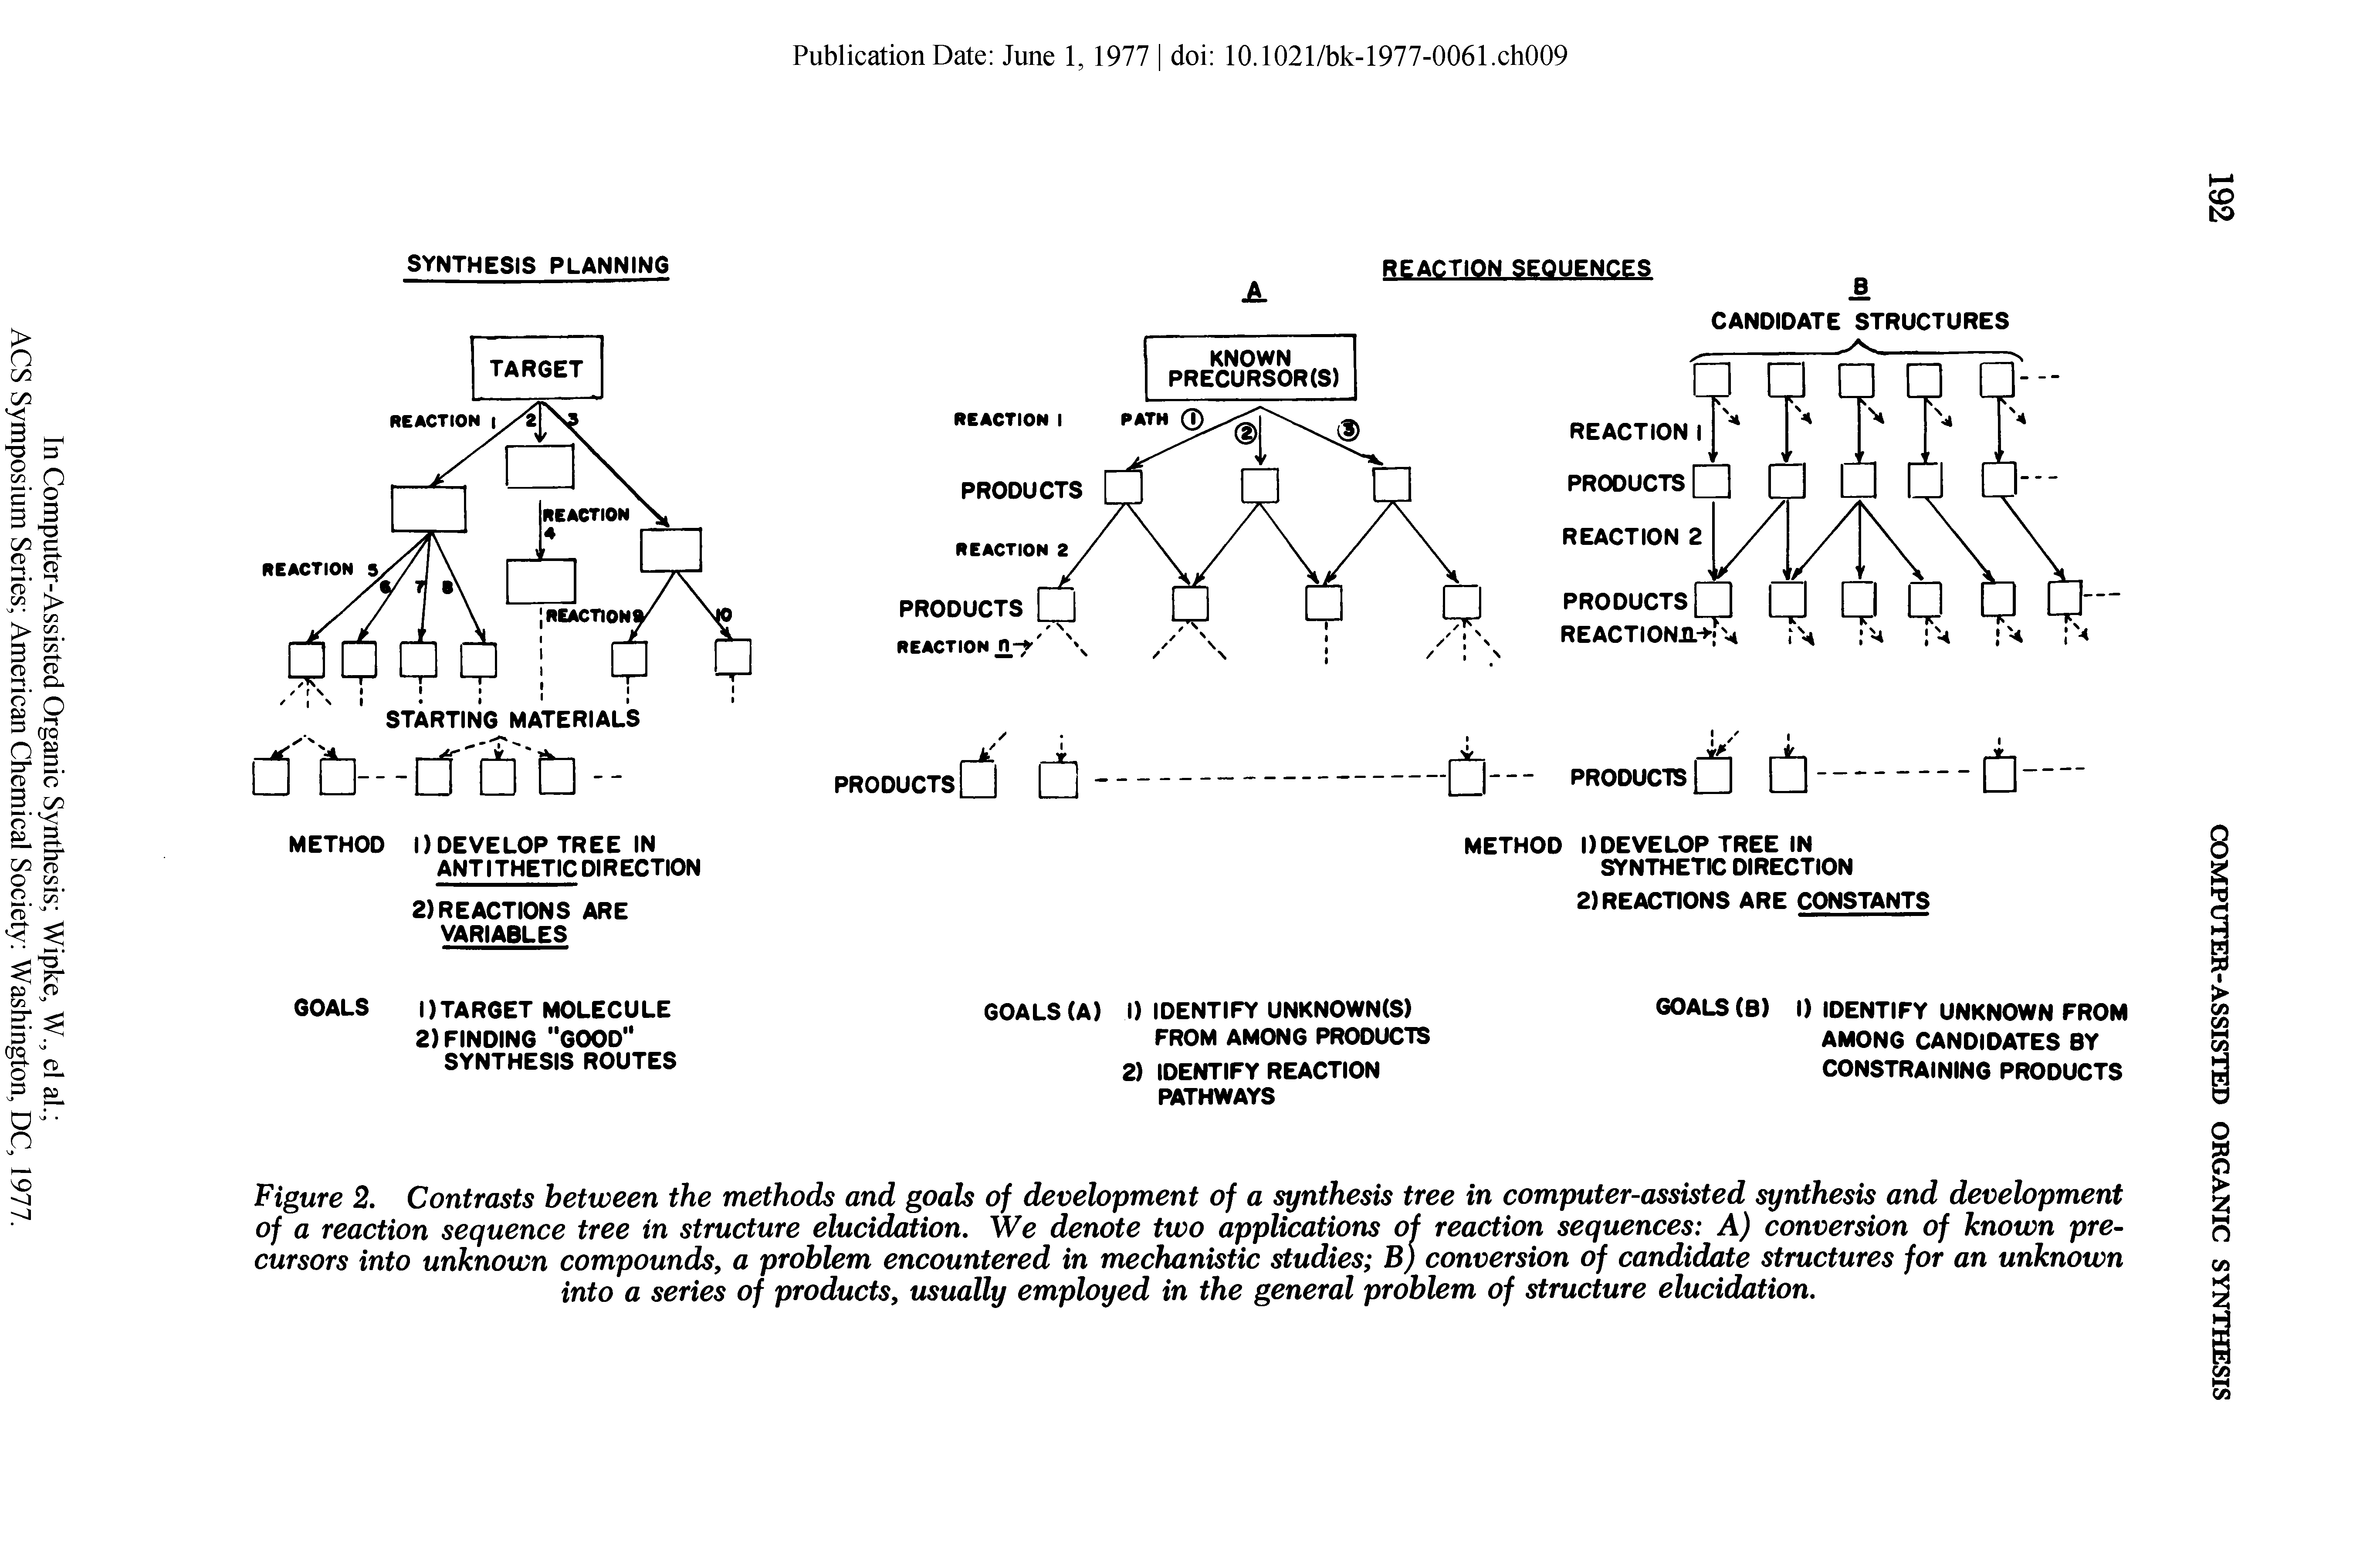 Figure 2. Contrasts between the methods and goals of development of a synthesis tree in computer-assisted synthesis and development of a reaction sequence tree in structure elucidation. We denote two applications of reaction sequences A) conversion of known precursors into unknown compounds, a problem encountered in mechanistic studies B) conversion of candidate structures for an unknown into a series of products, usually employed in the general problem of structure elucidation.